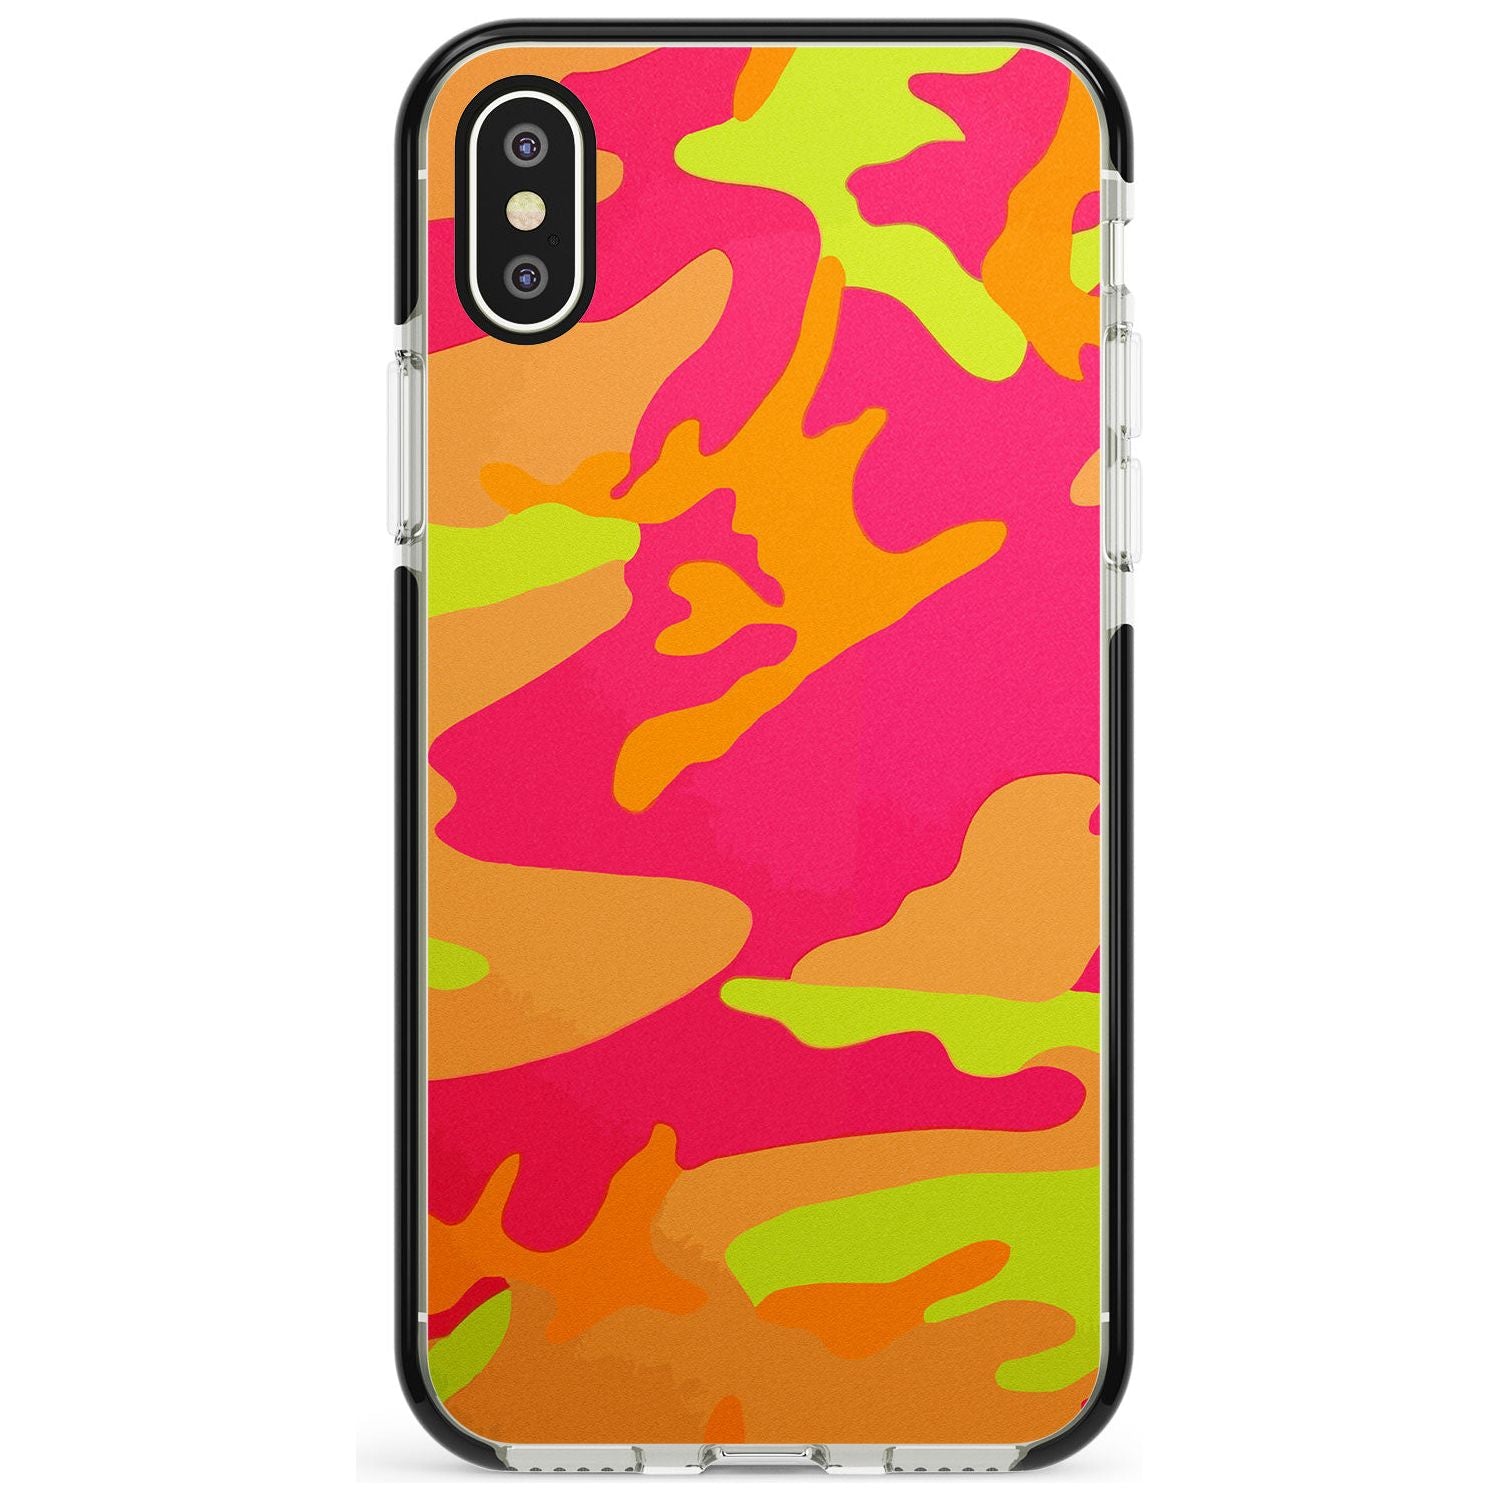 Neon Camo Black Impact Phone Case for iPhone X XS Max XR